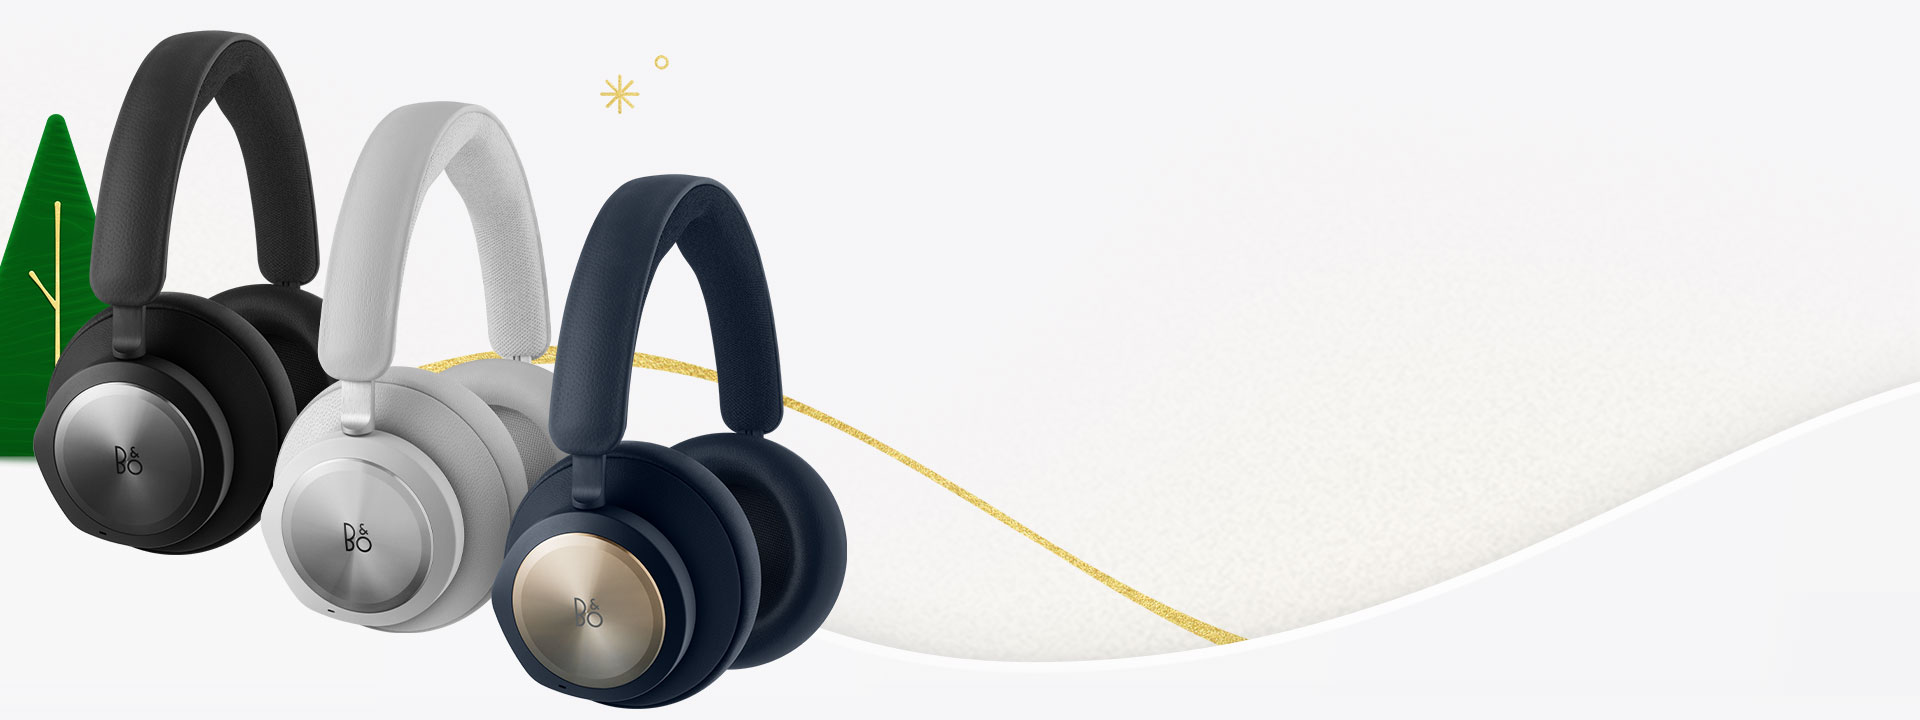 Three Bang & Olufsen Beoplay Portal headsets against a holiday background. 